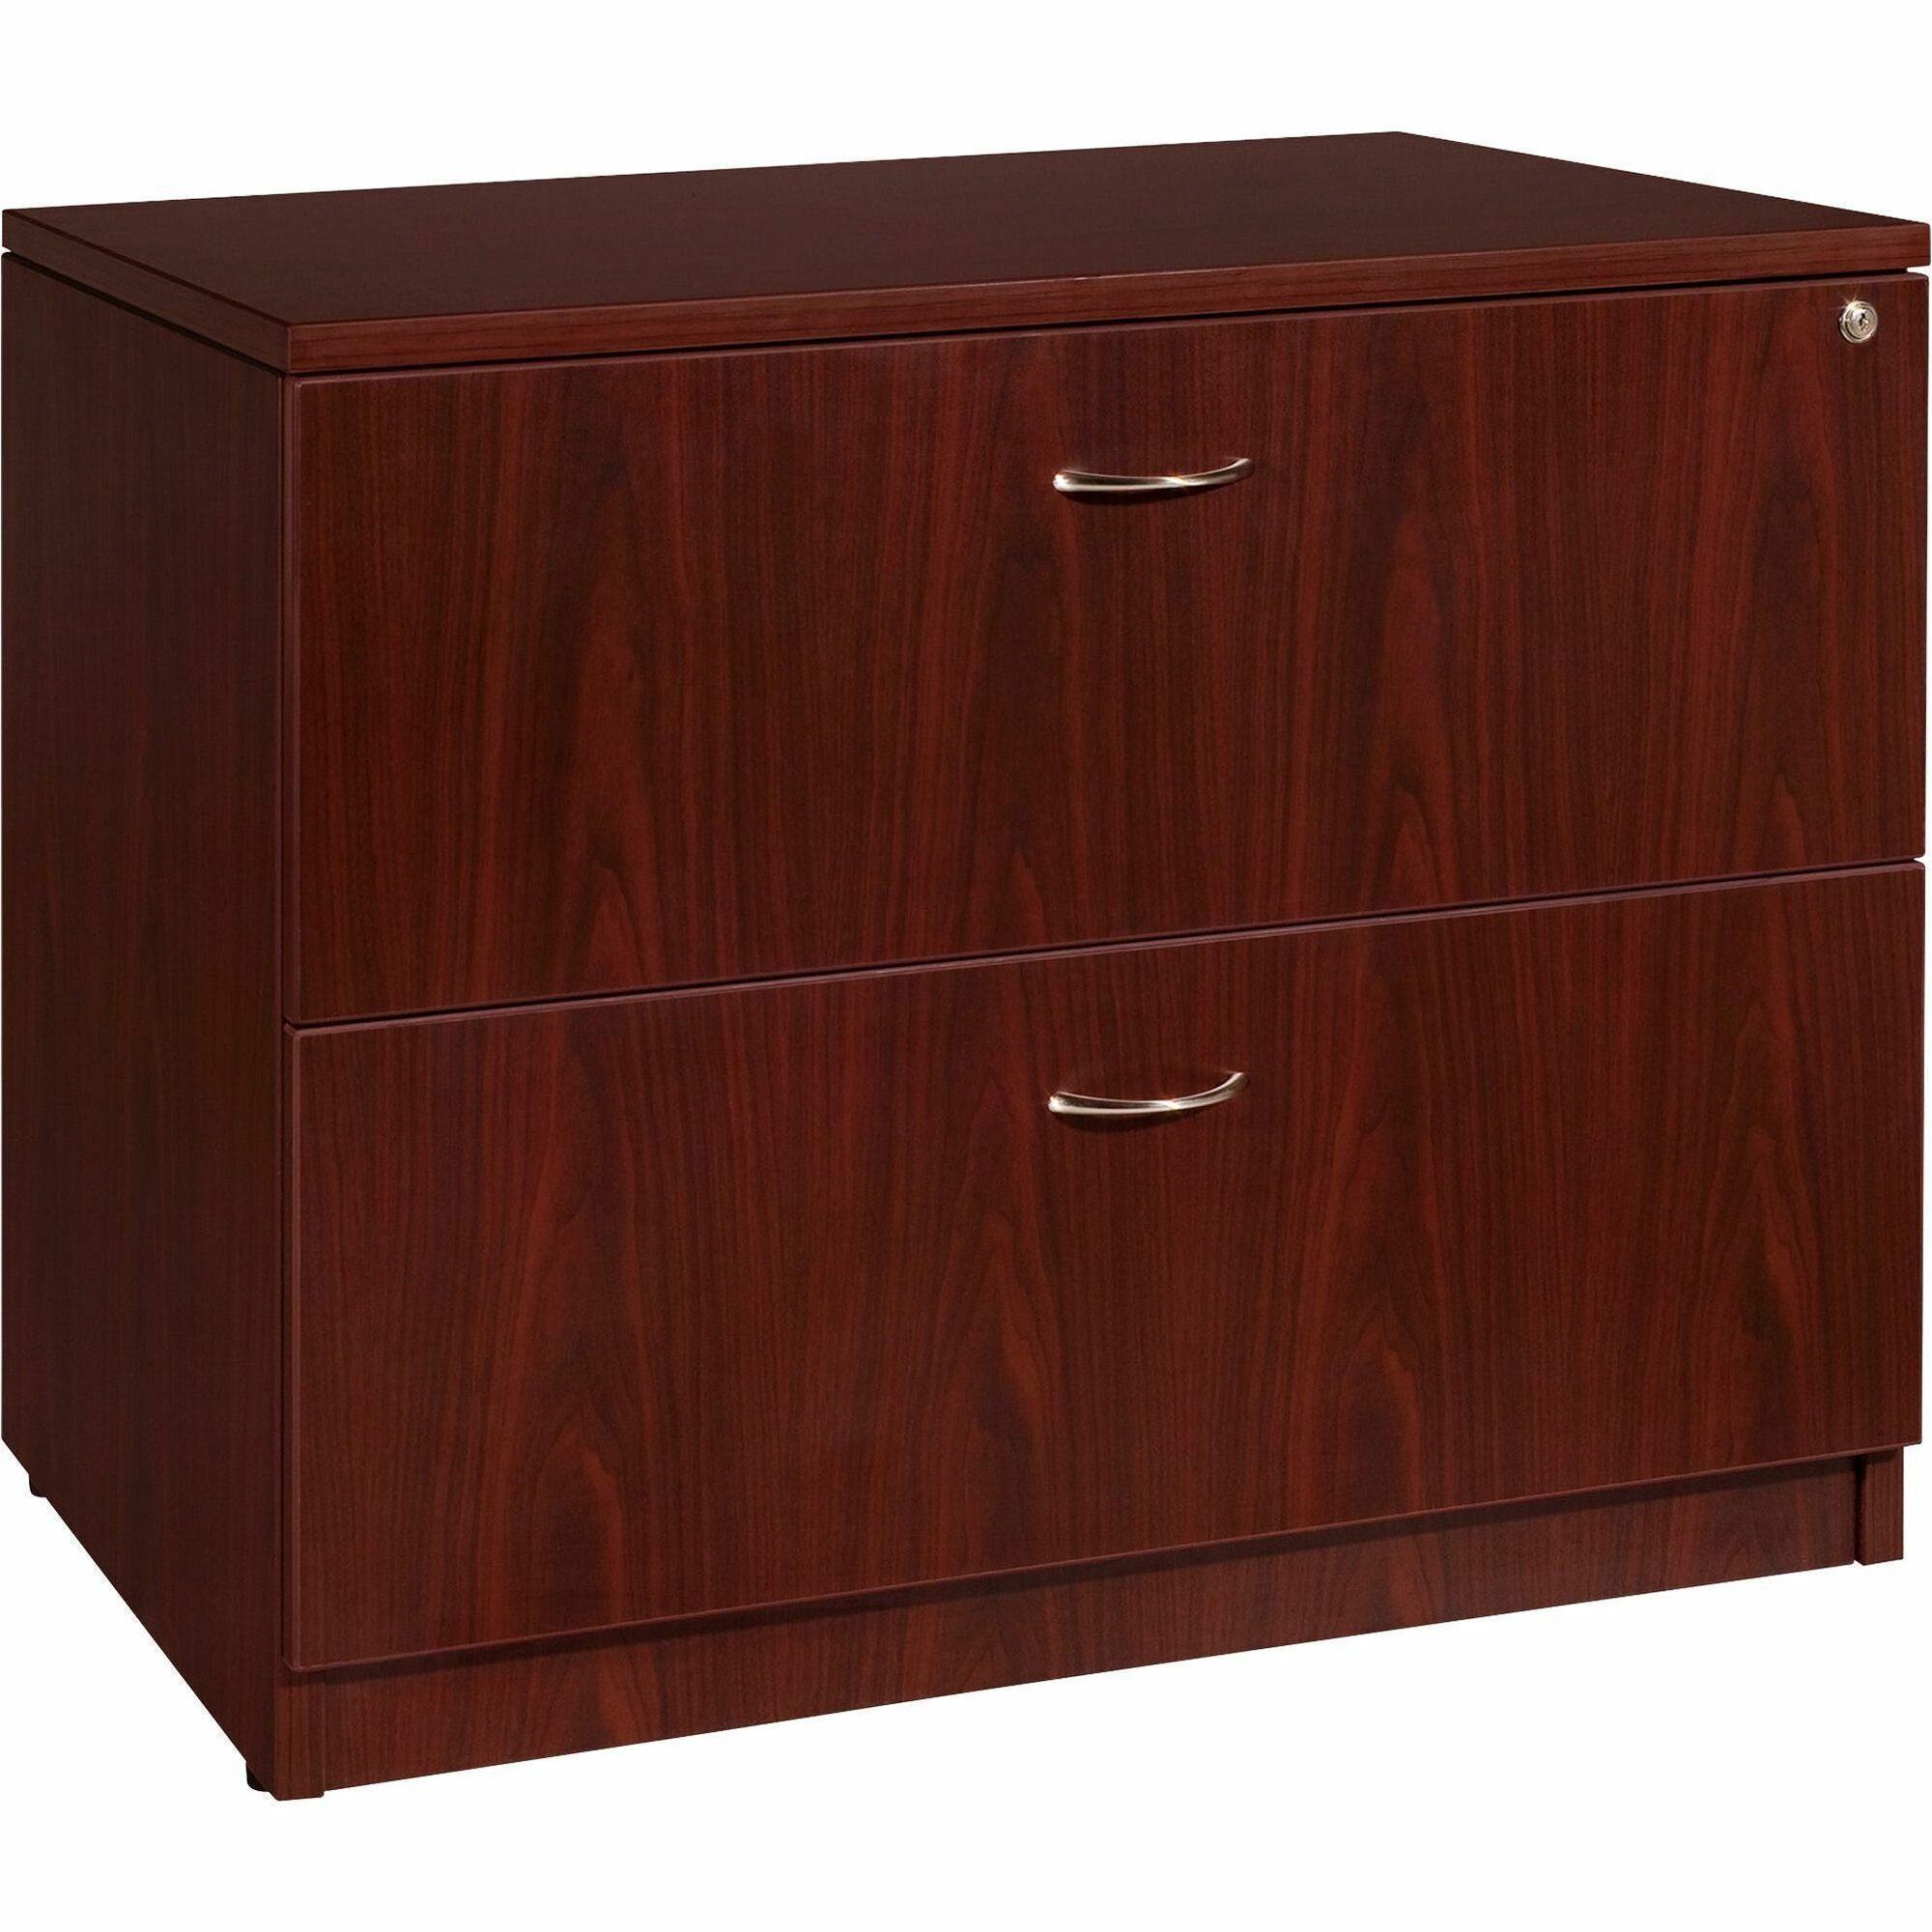 Lorell Essentials Series Lateral File - 35.5" x 22" x 1" x 29.5" - 2 x File Drawer(s) - Finish: Laminate, Mahogany - Lockable Drawer, Leveling Glide, Durable, Ball-bearing Suspension, Lockable Drawer - 